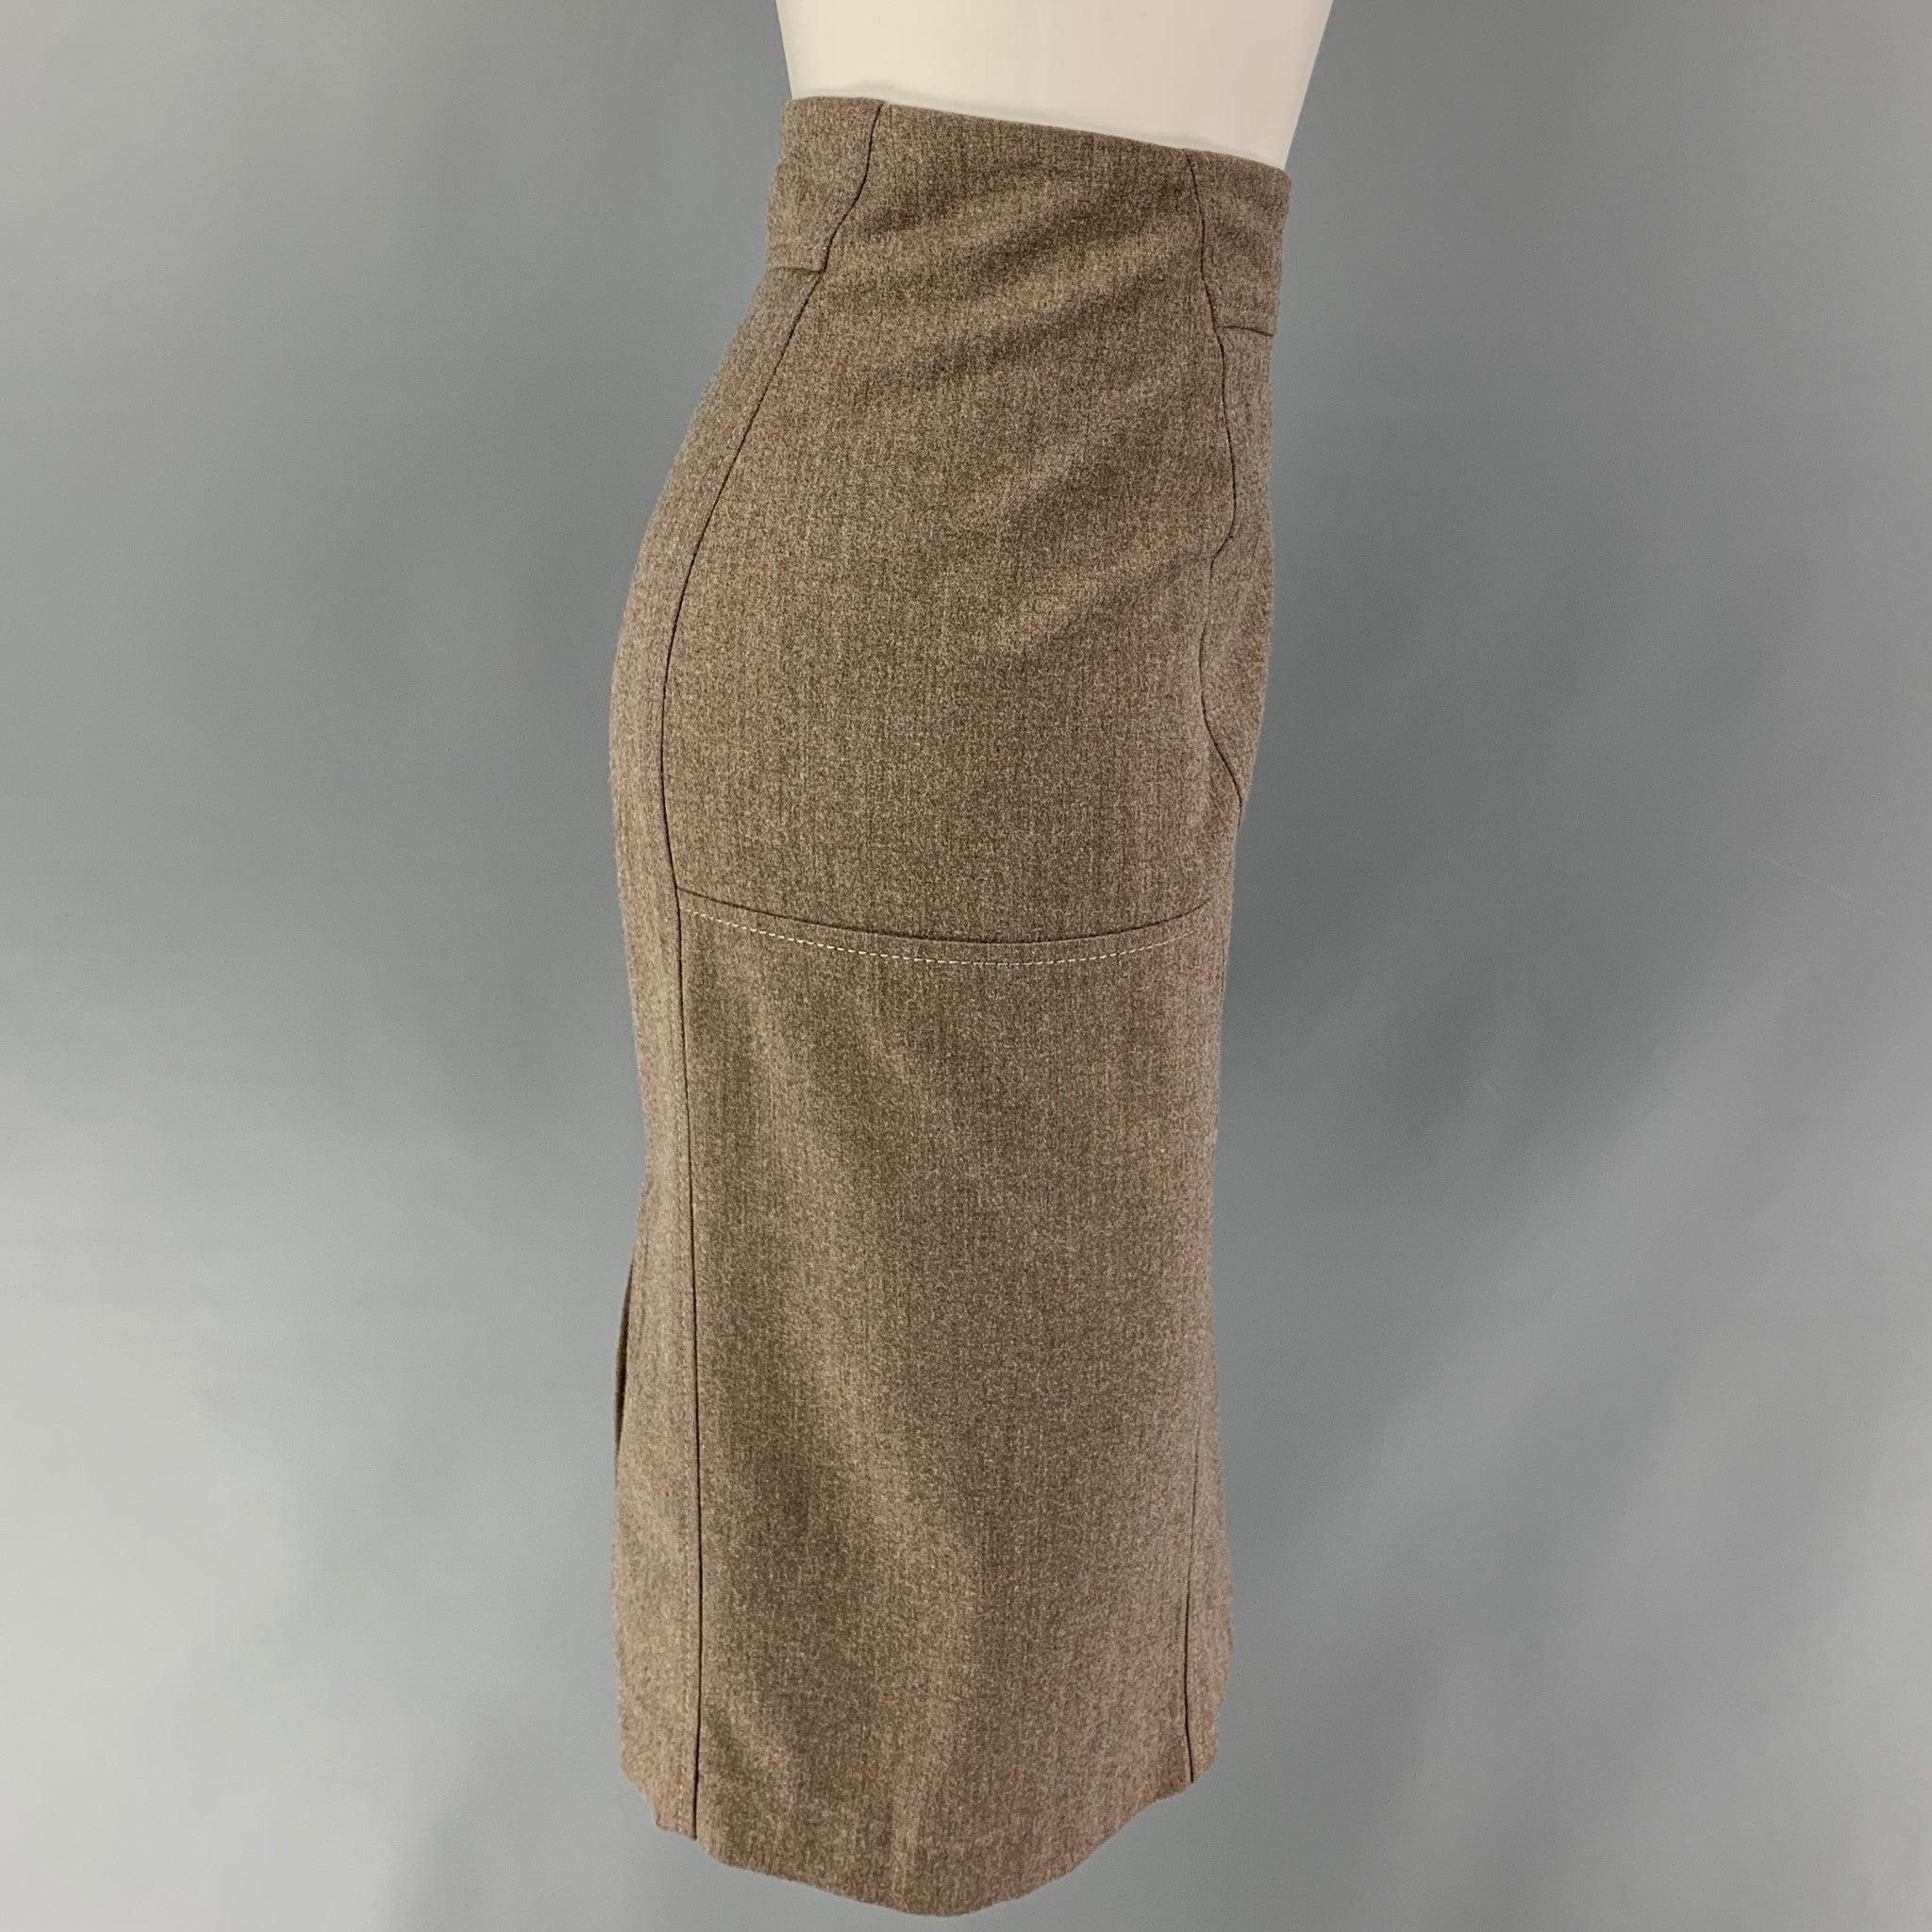 BRUNELLO CUCINELLI skirt comes in a brown heather wool blend featuring a pencil style, back slit, and a back zip up closure. Made in Italy.
Very Good
Pre-Owned Condition. 

Marked:   I 44 / D 38 / F 40 / US 8 

Measurements: 
  Waist: 32 inches 